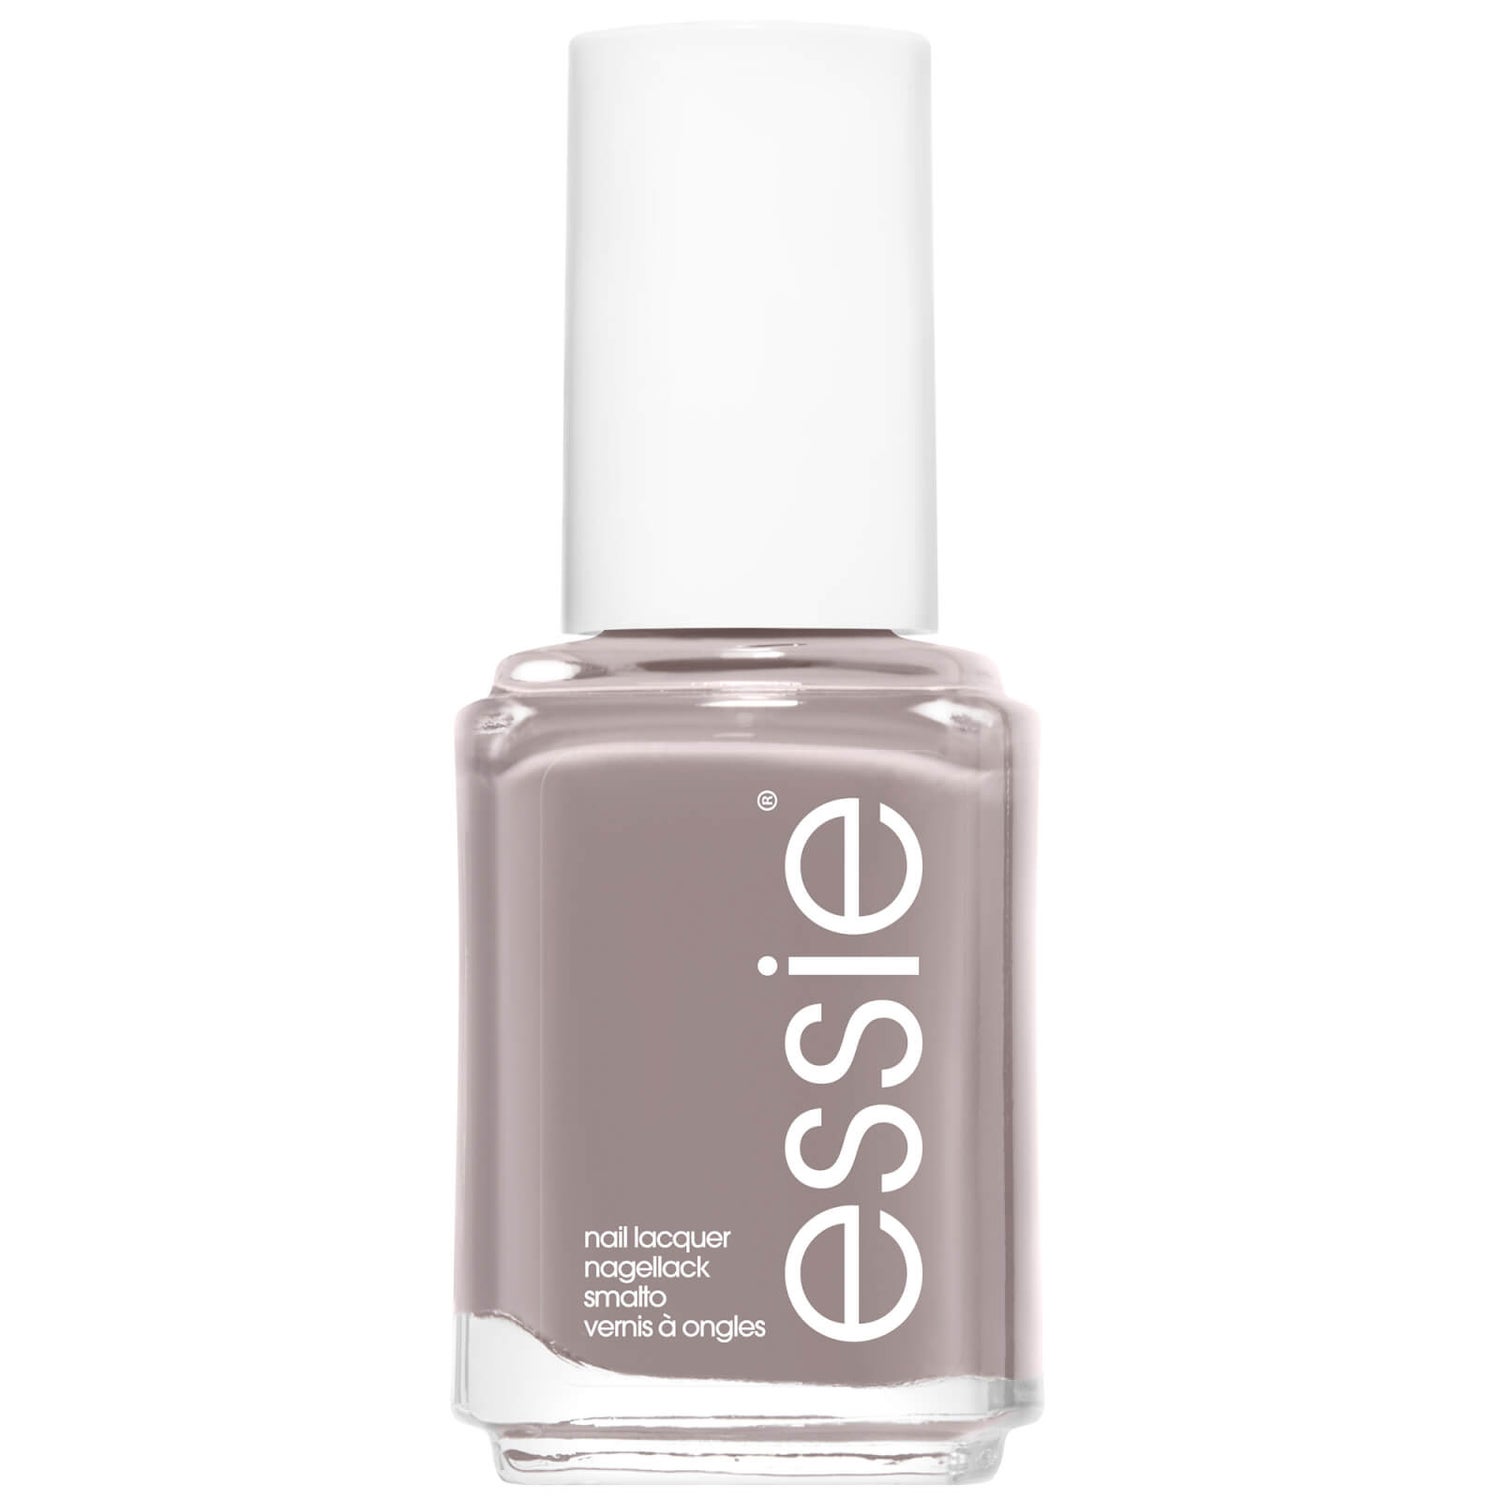 Vernis à Ongles 13 Chinchilly essie